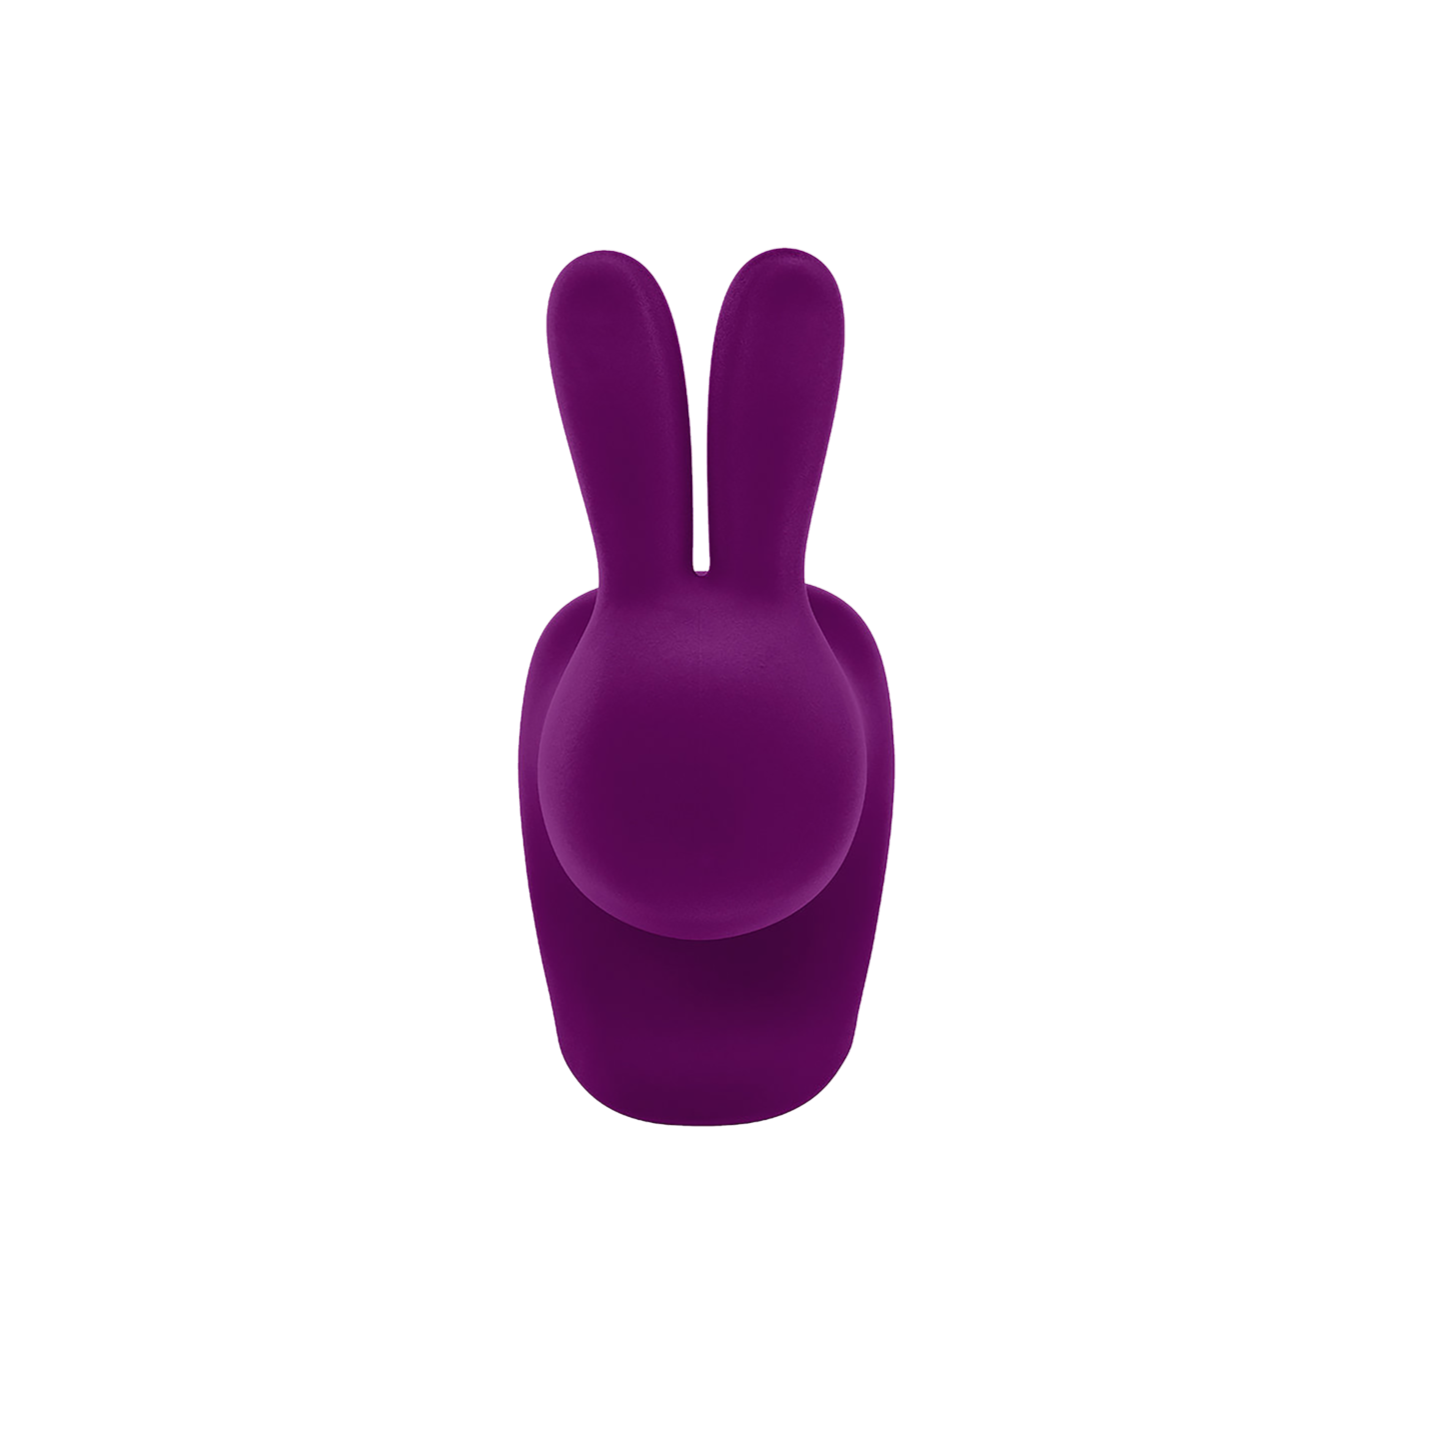 Rabbit is a book support designed by Stefano Giovannoni. A symbol of love and fertility, this toddler will bring you happiness! The velvet surface is softer to the touch.